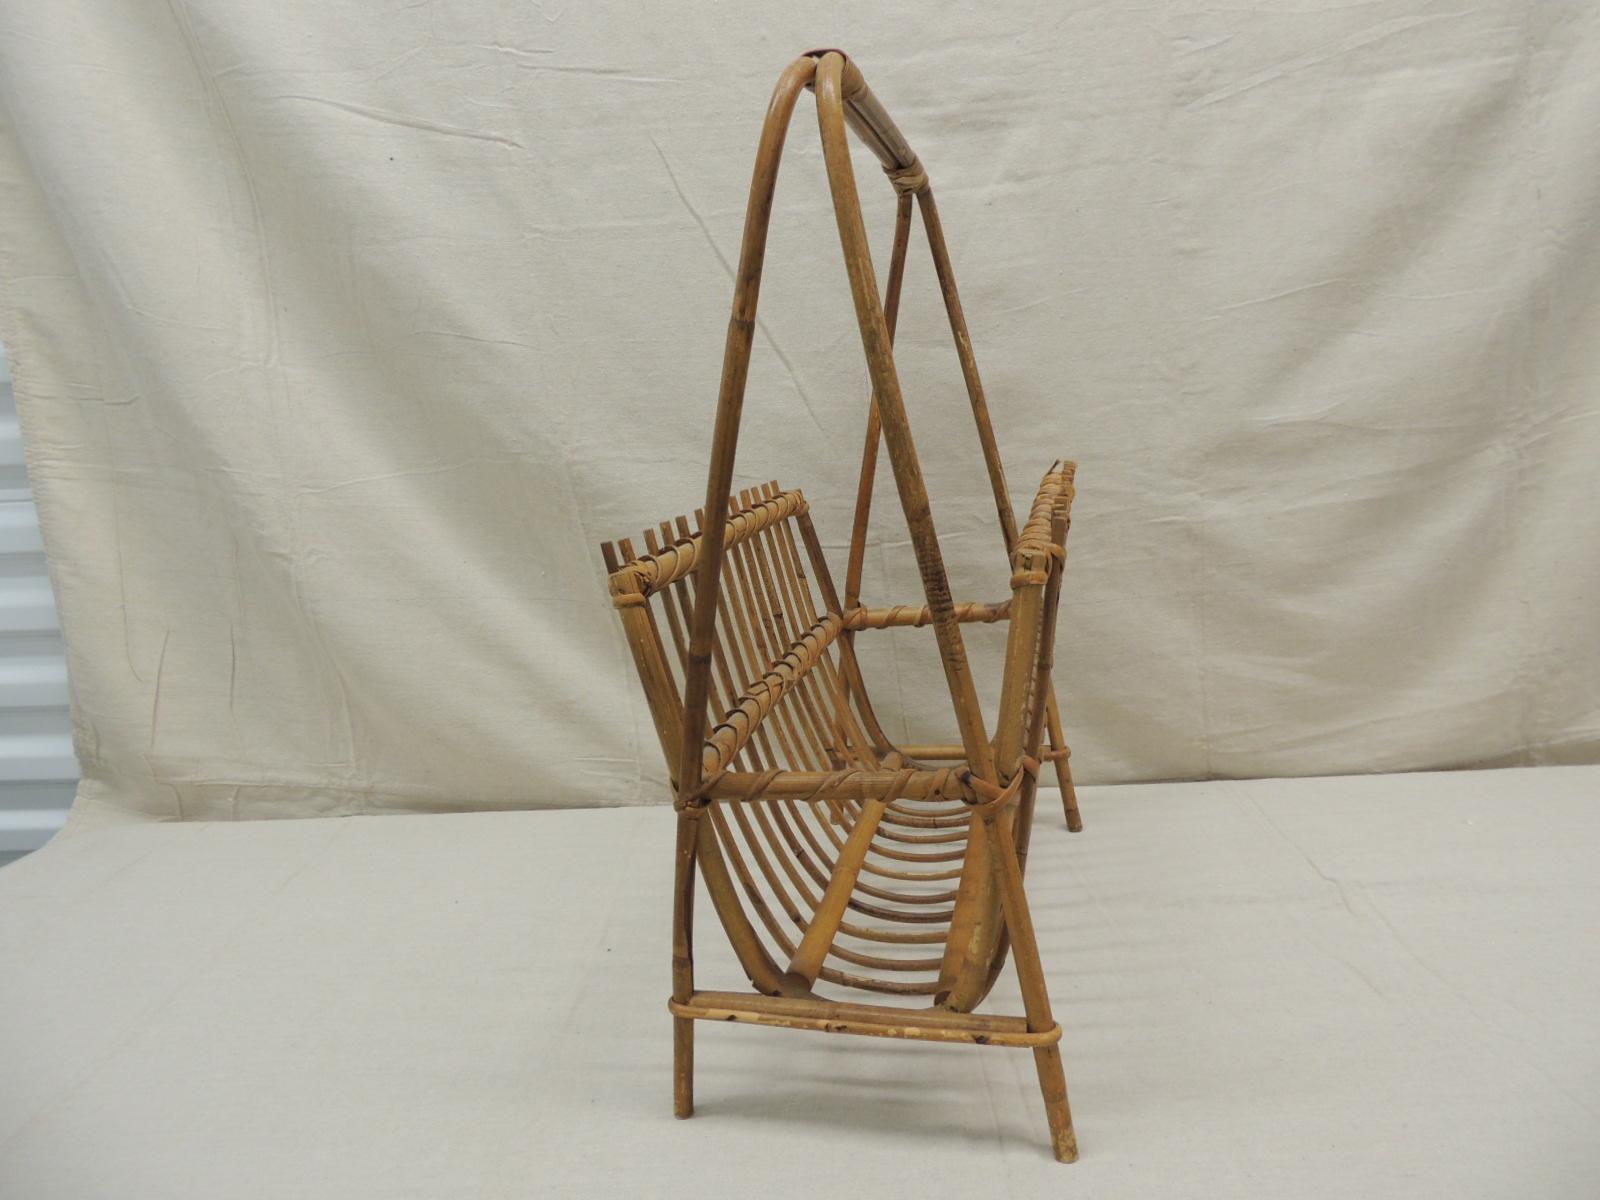 Large vintage bamboo magazine holder or bookstand with handle.
Size: 22.5